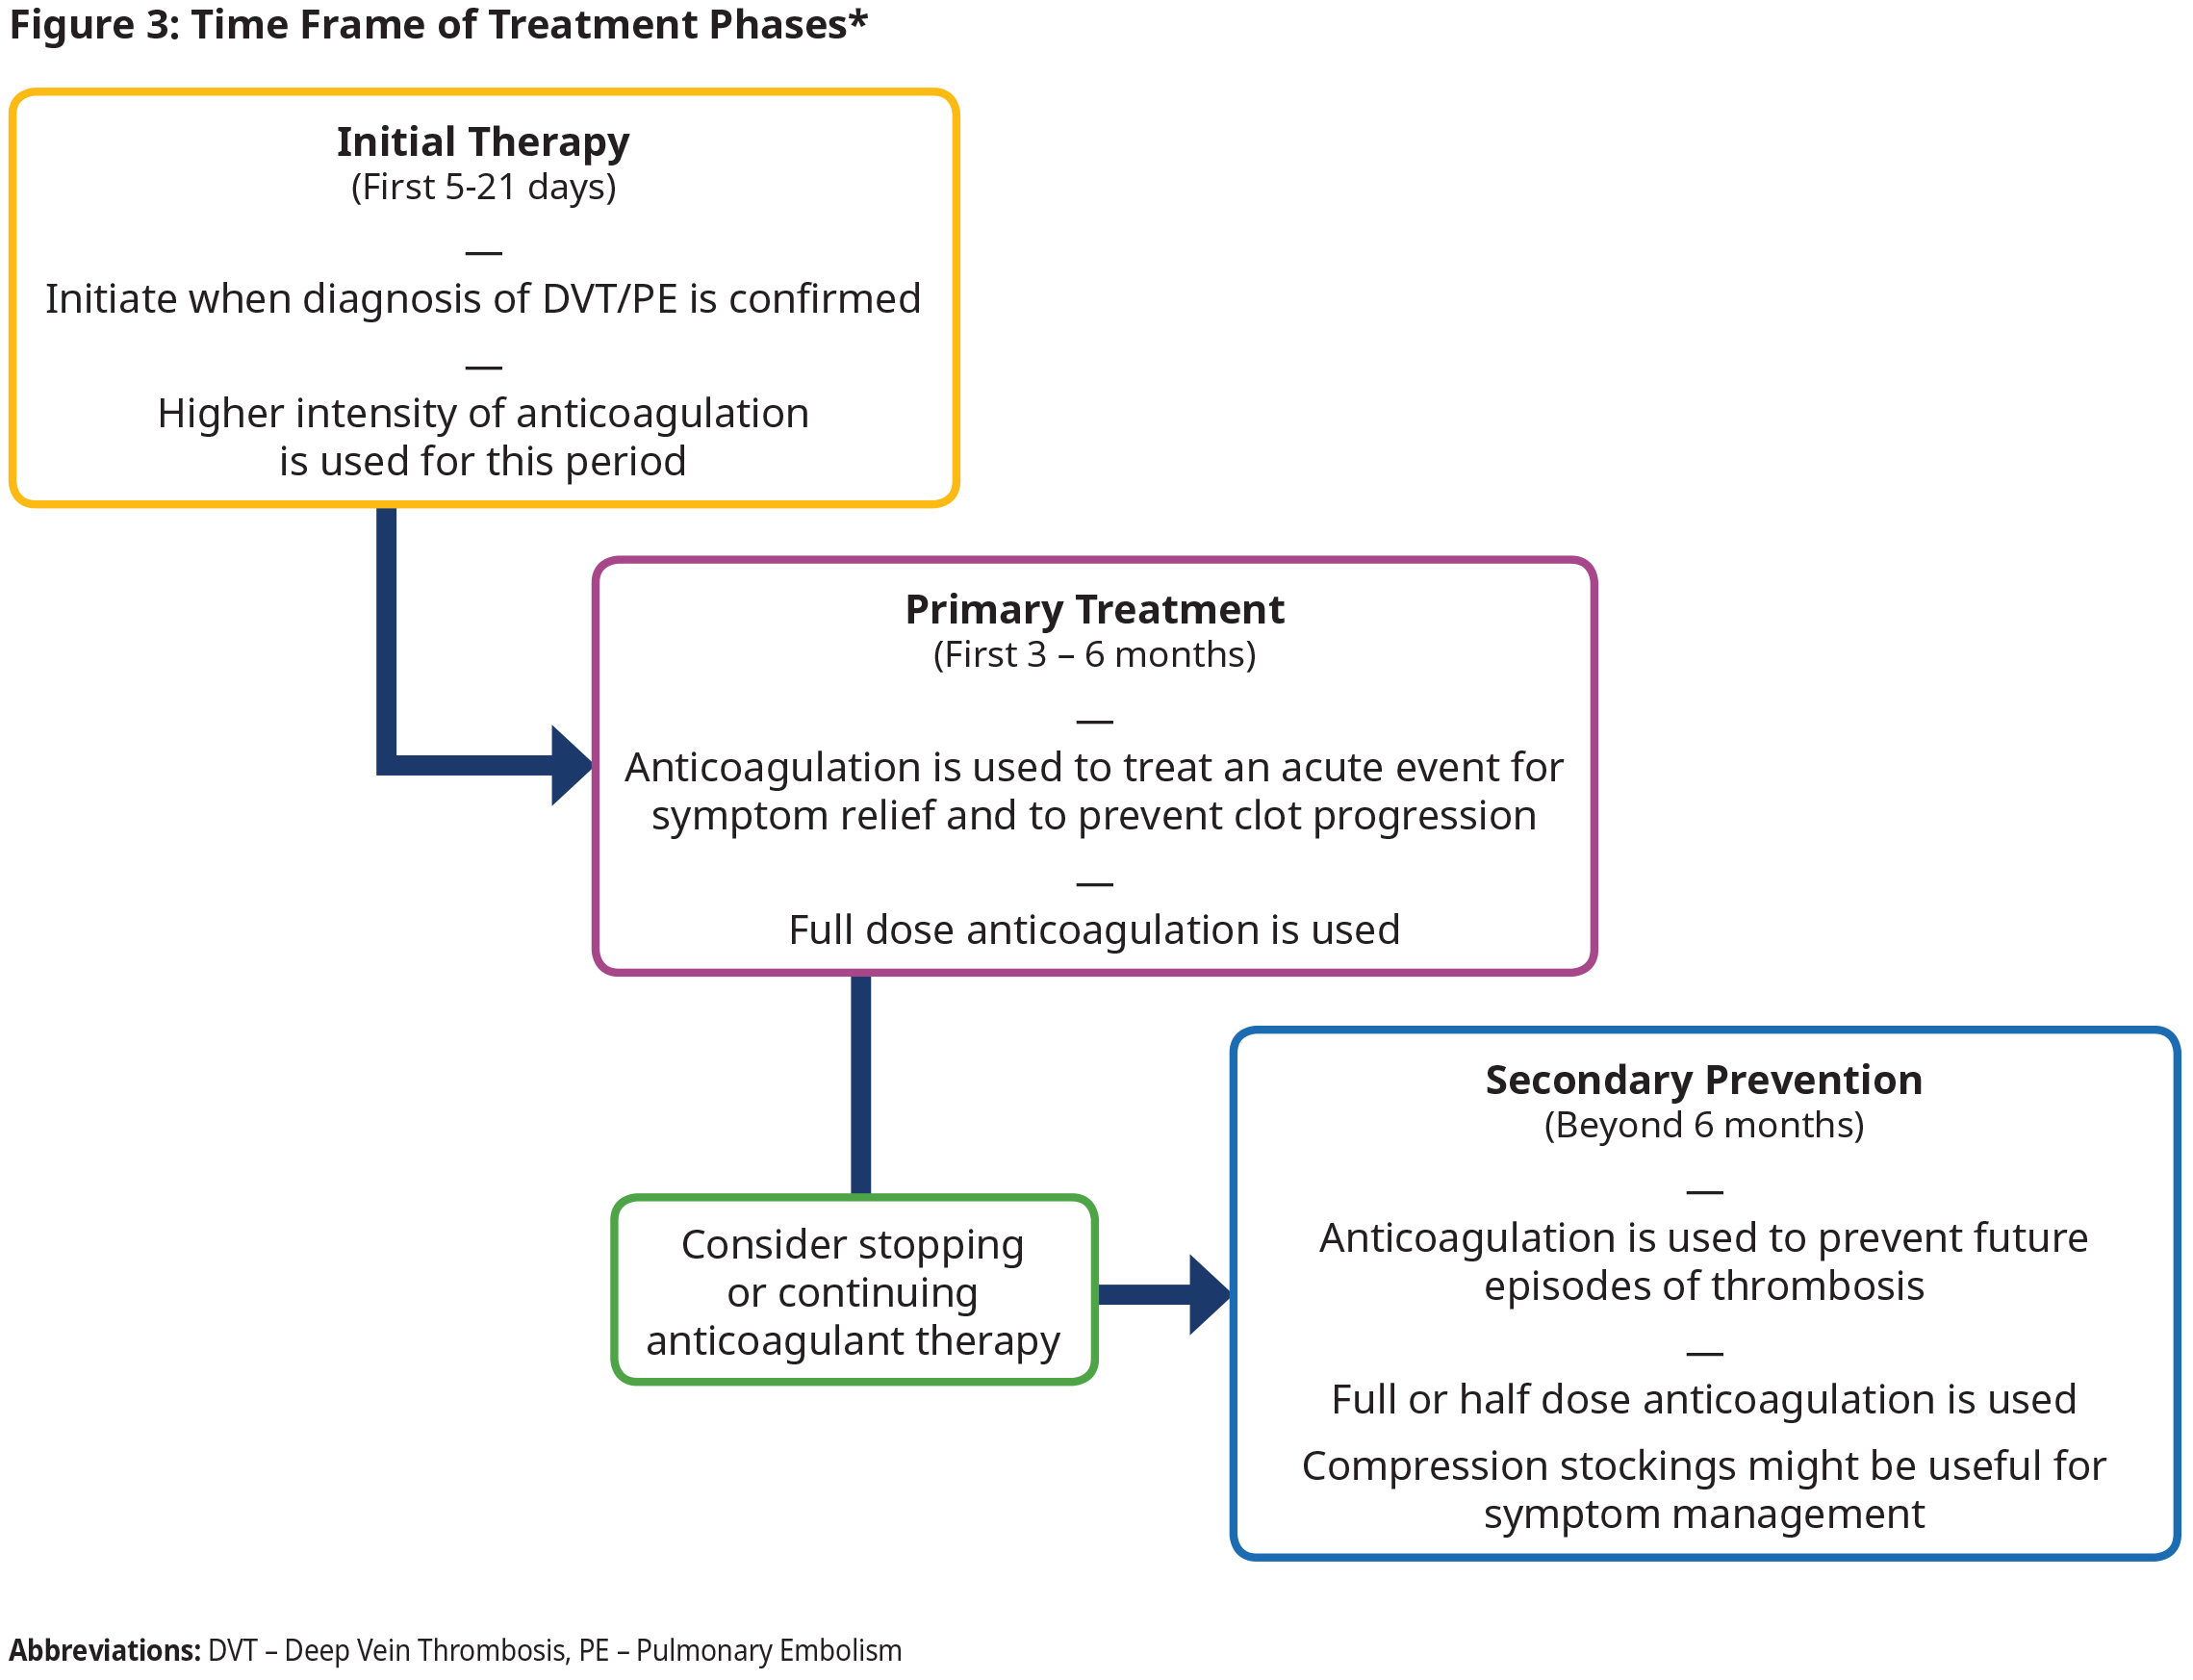 Time Frame of Treatment Phases